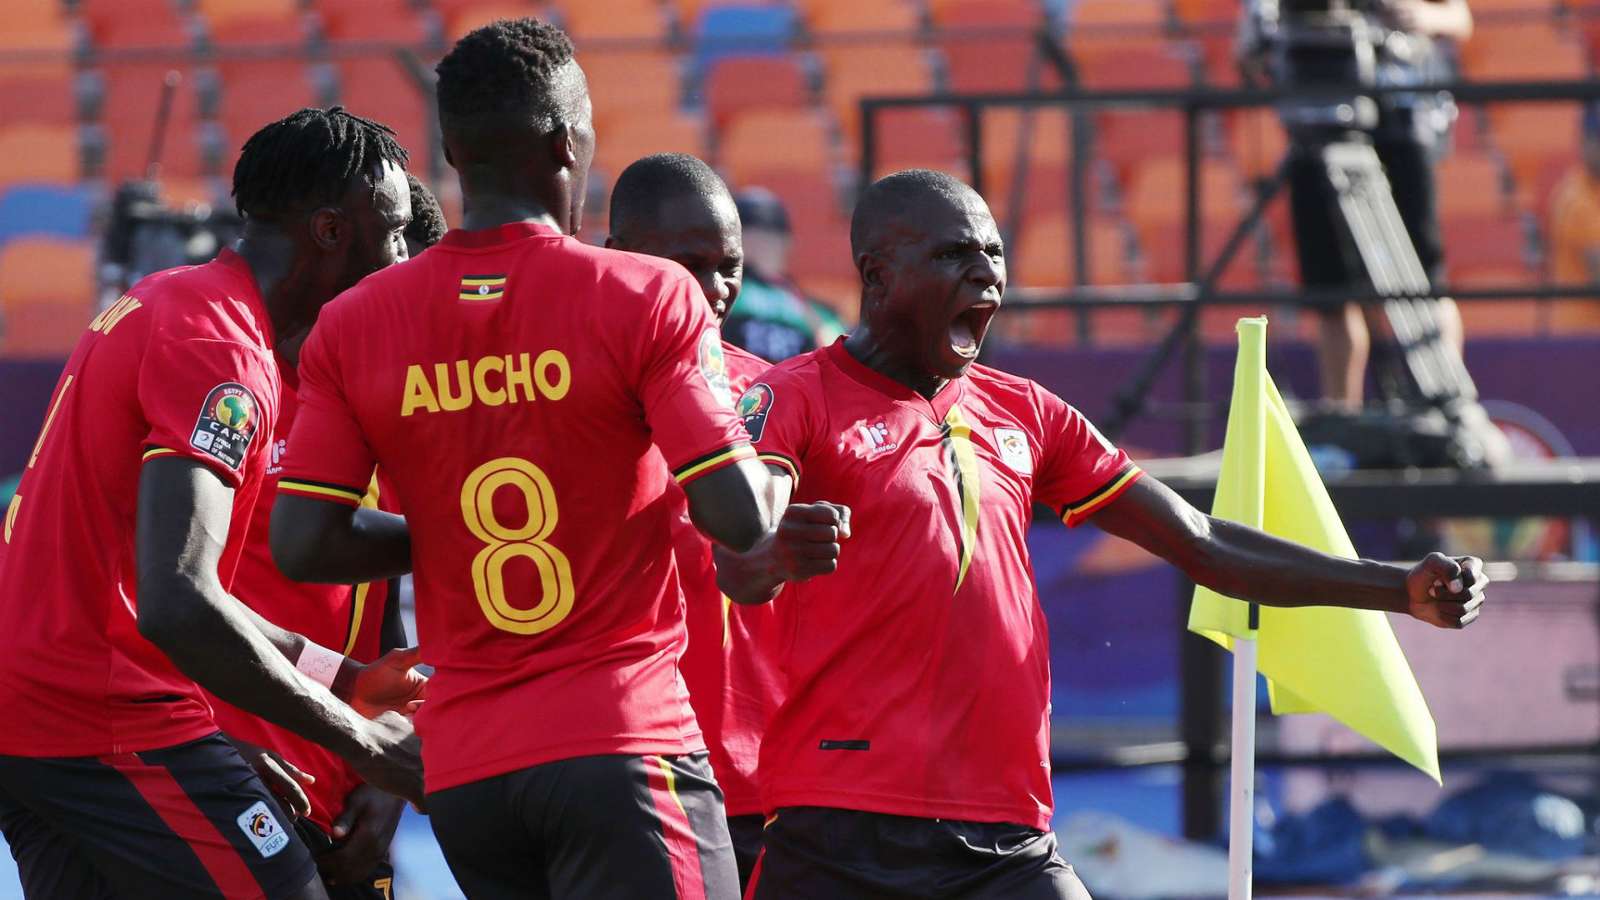 Sebastien Desabre's Uganda enjoyed a wonderful start to the Africa Cup of Nations with a deserved 2-0 win over Democratic Republic of Congo.